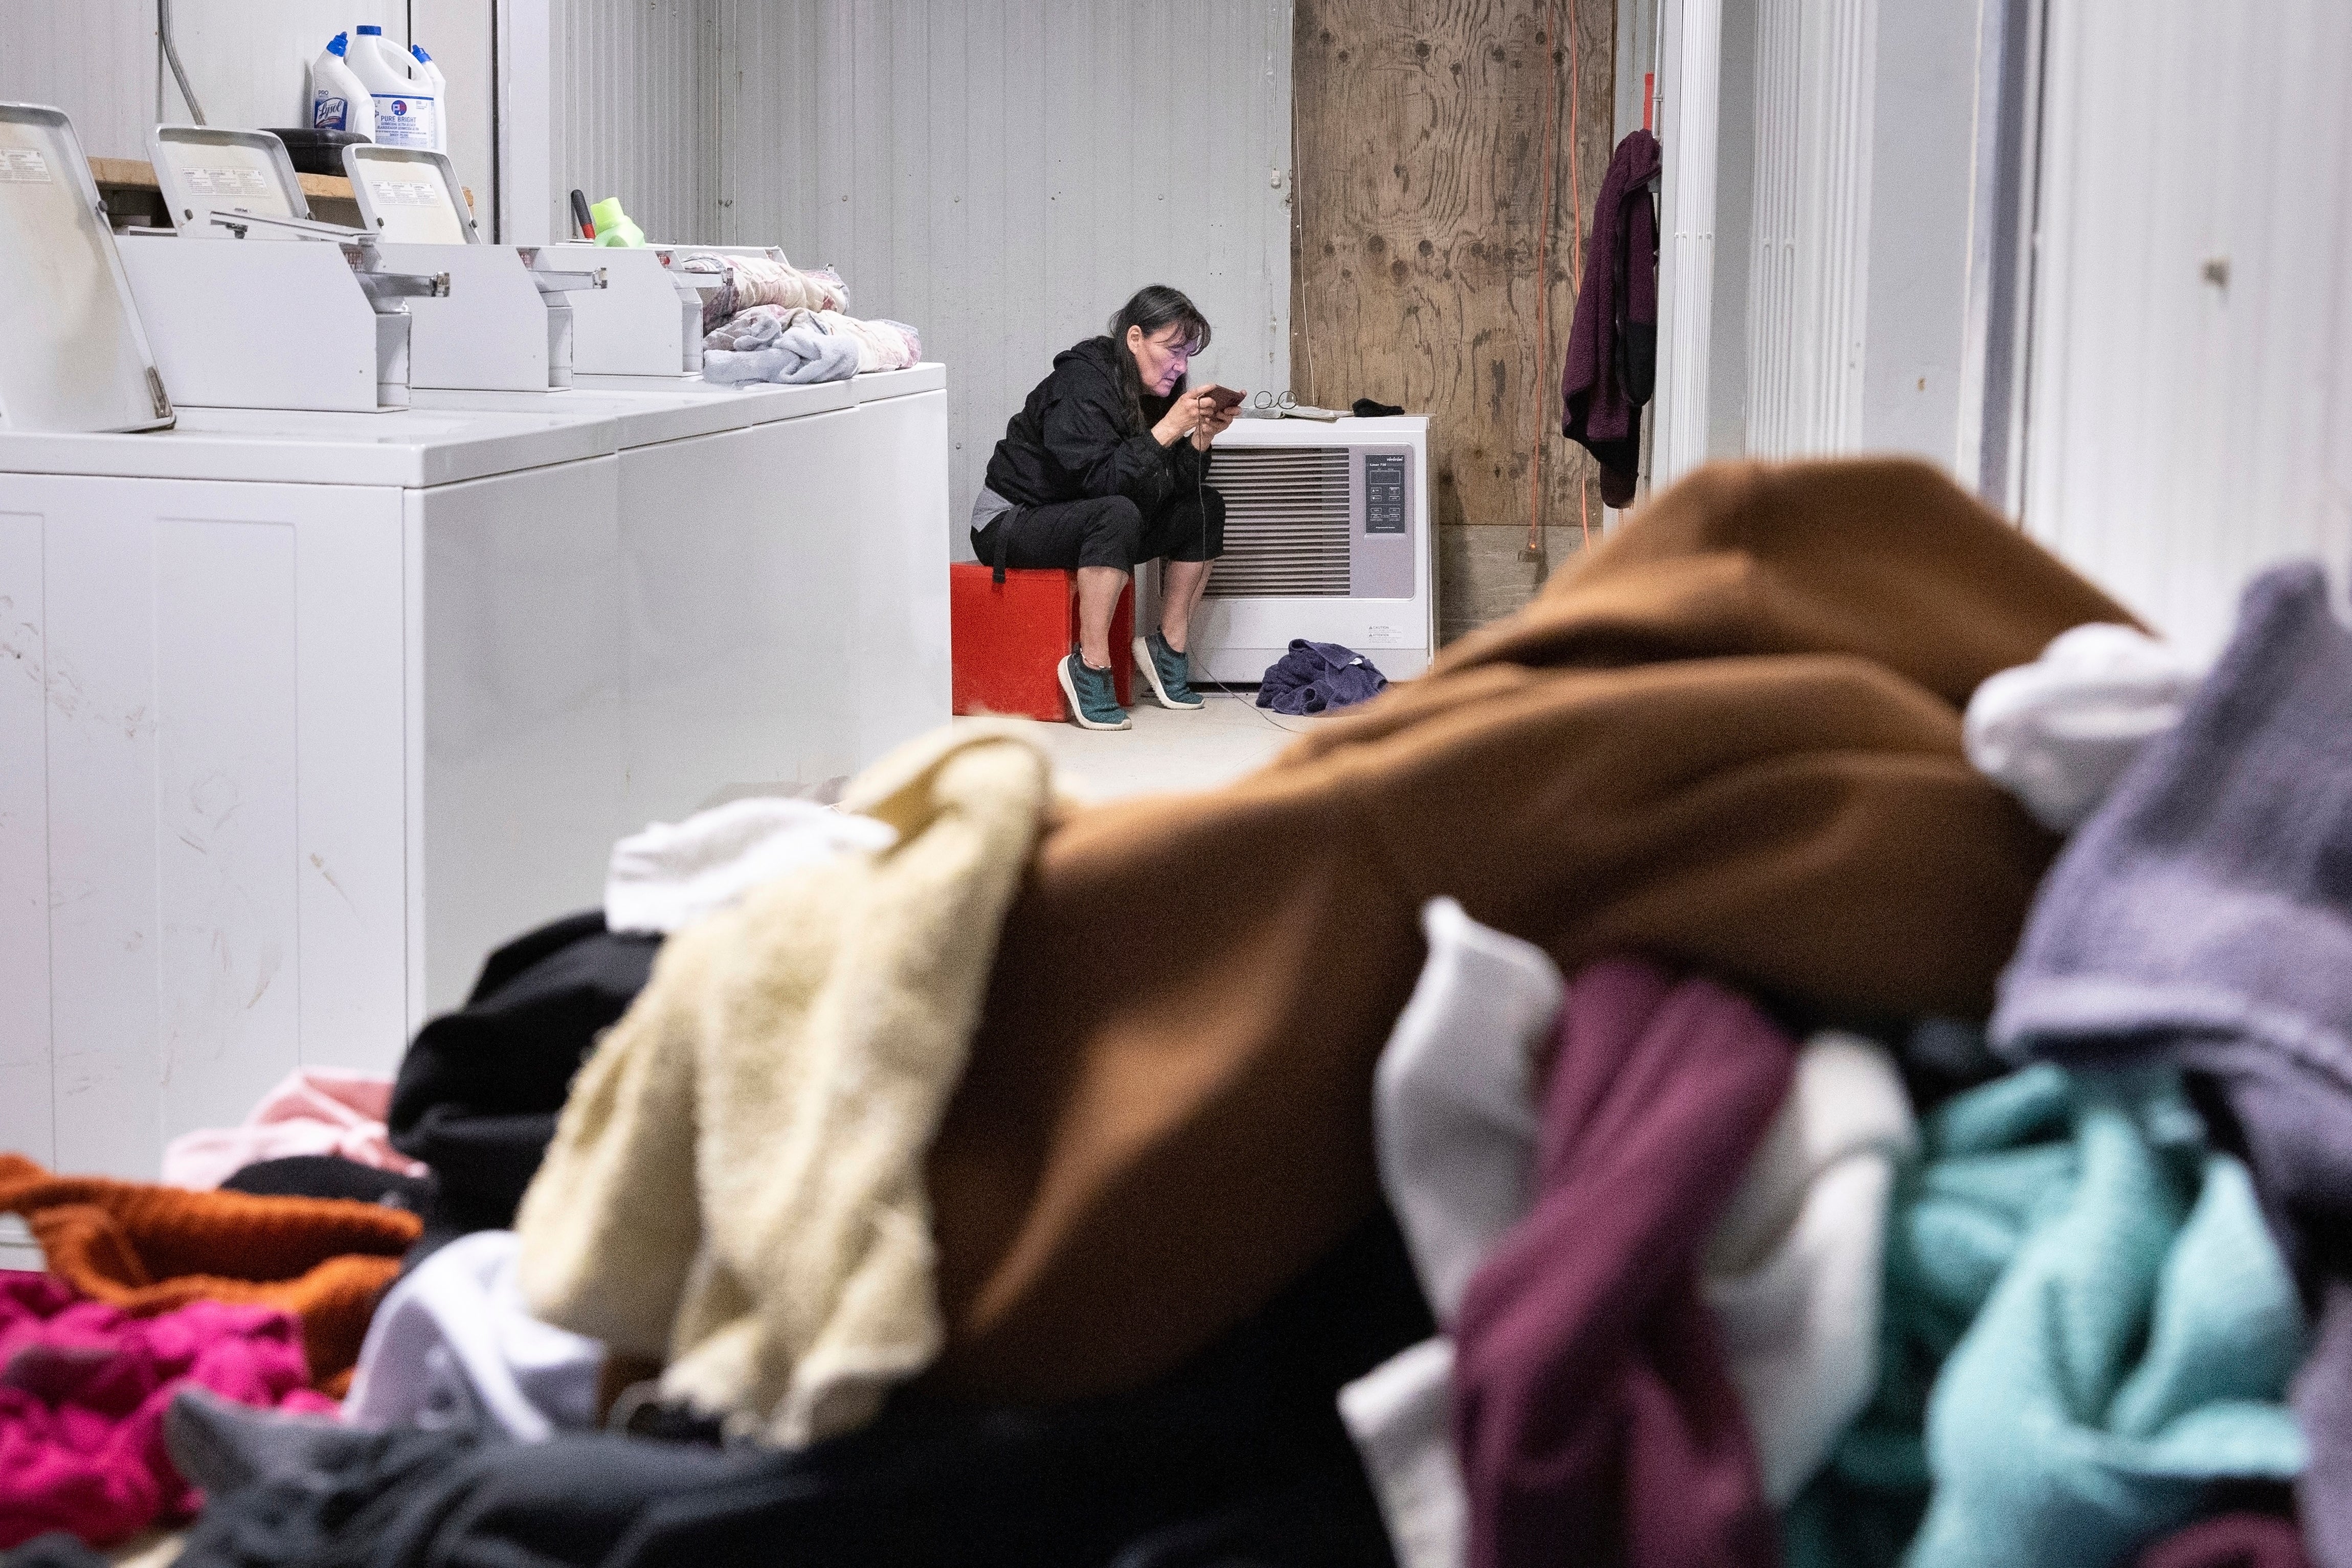 File: A woman uses a cell phone while keeping watch over washing machine